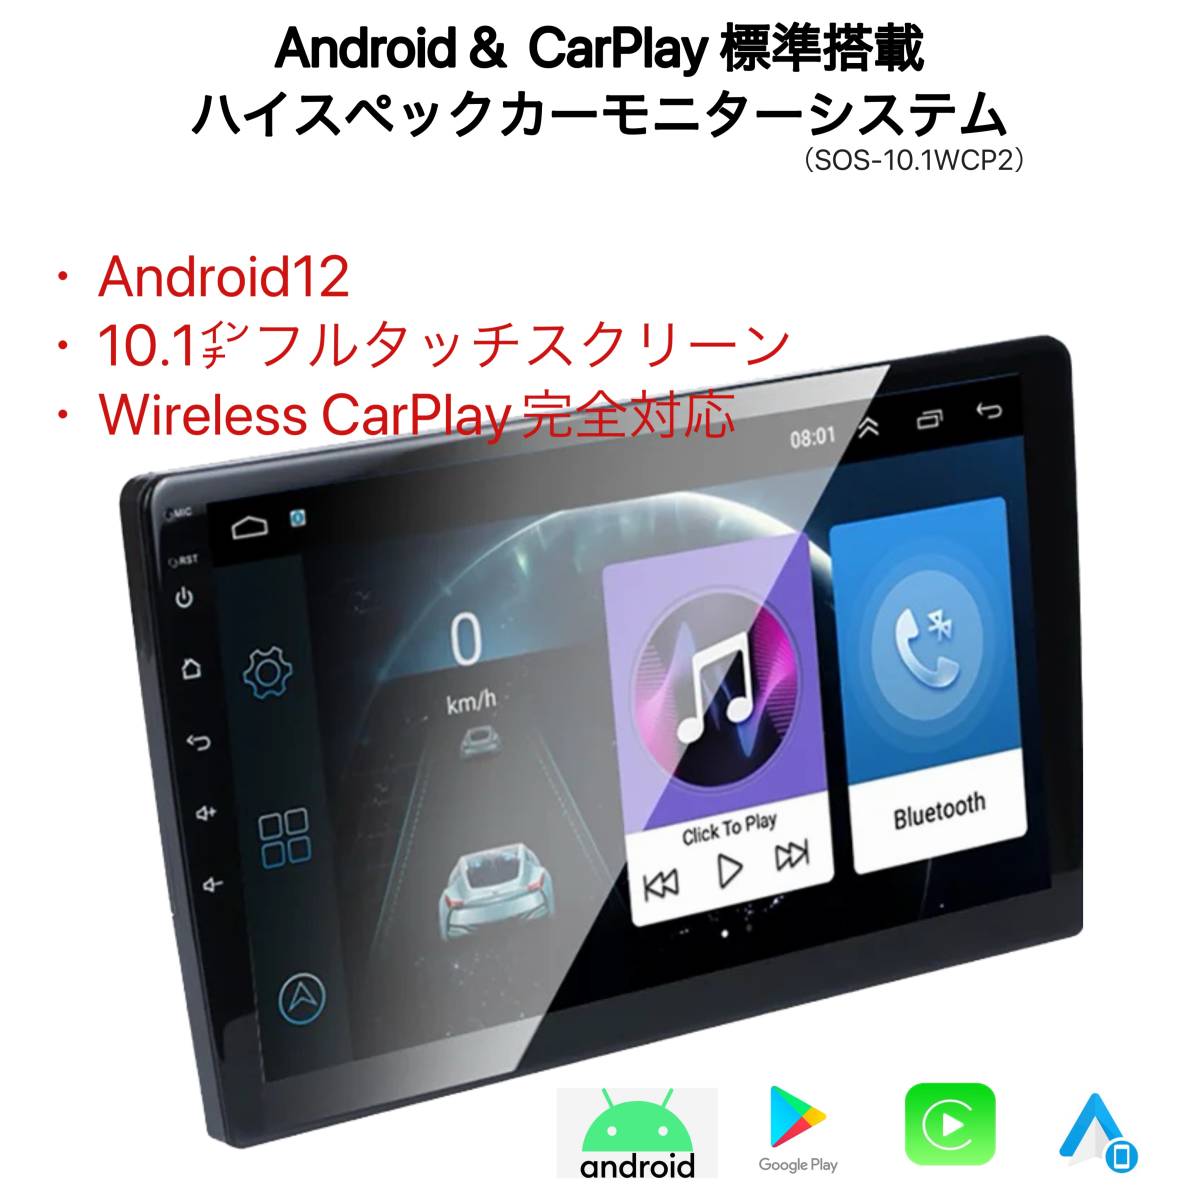 * free shipping *10.1 -inch large screen car monitor system newest AndroidOS installing CarPlay correspondence Apple car Play Android auto 